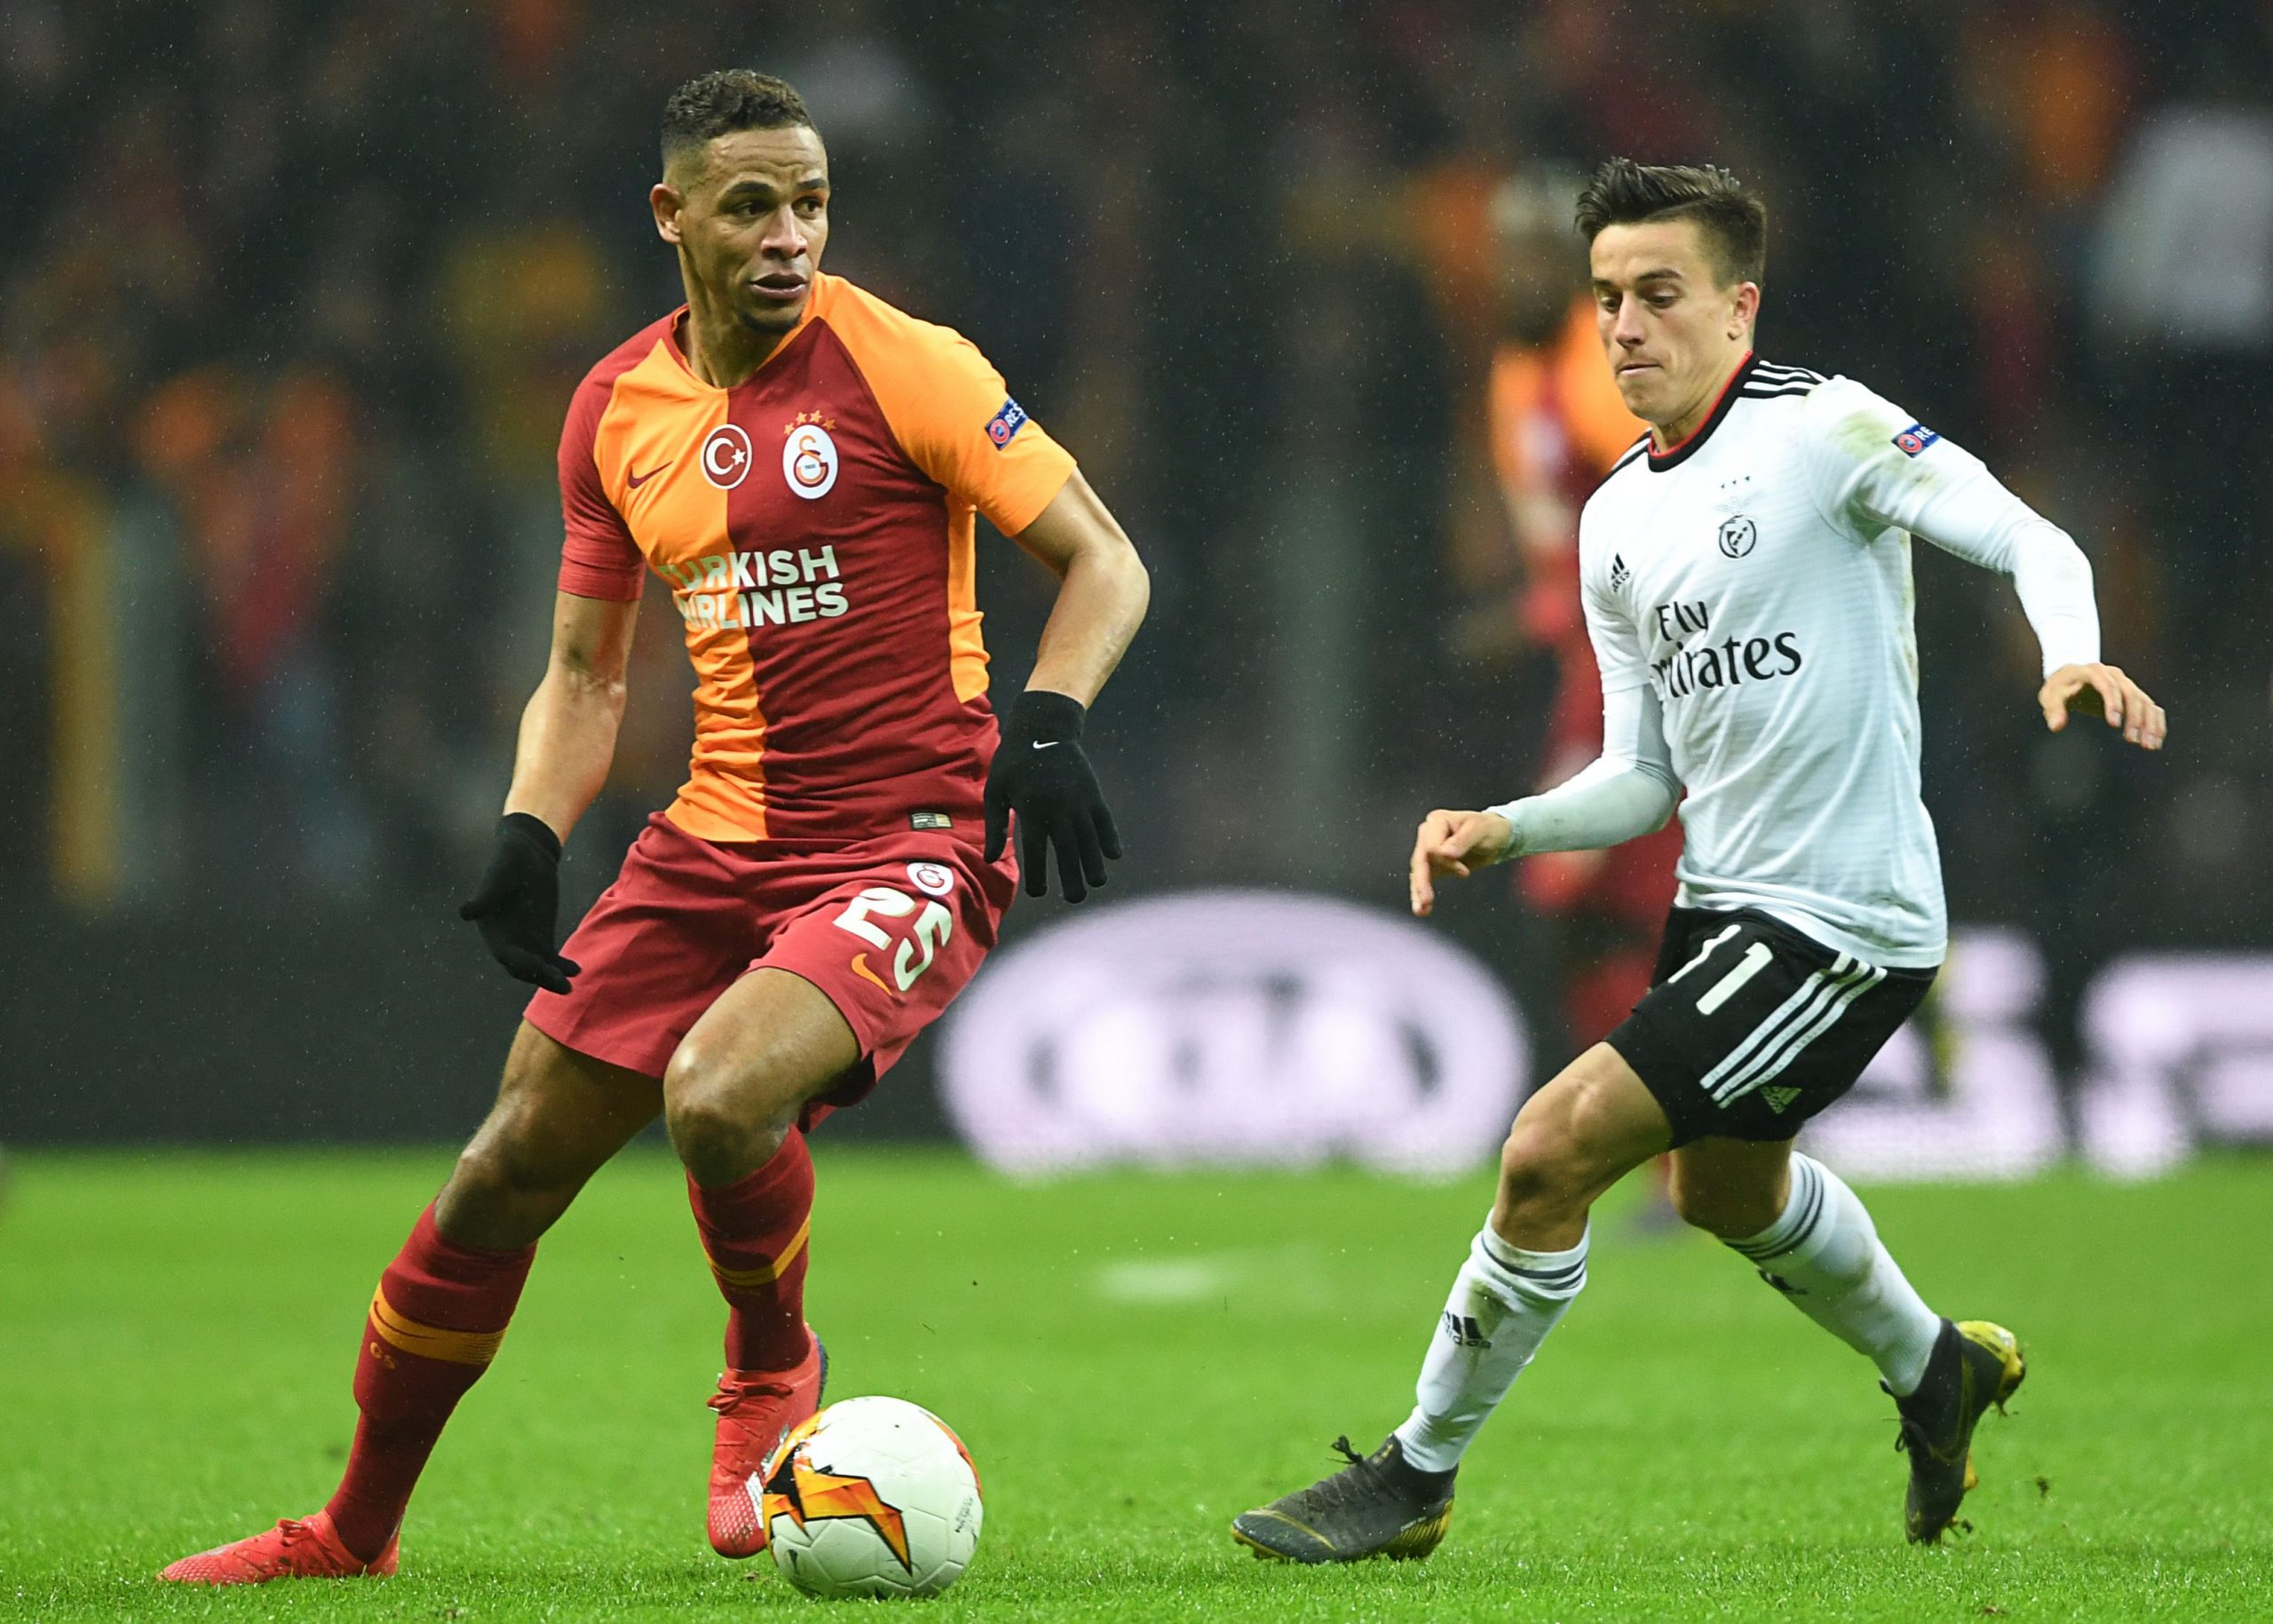 Franco Cervi (R) in action against Galatasaray in the Europa League (Getty Images)